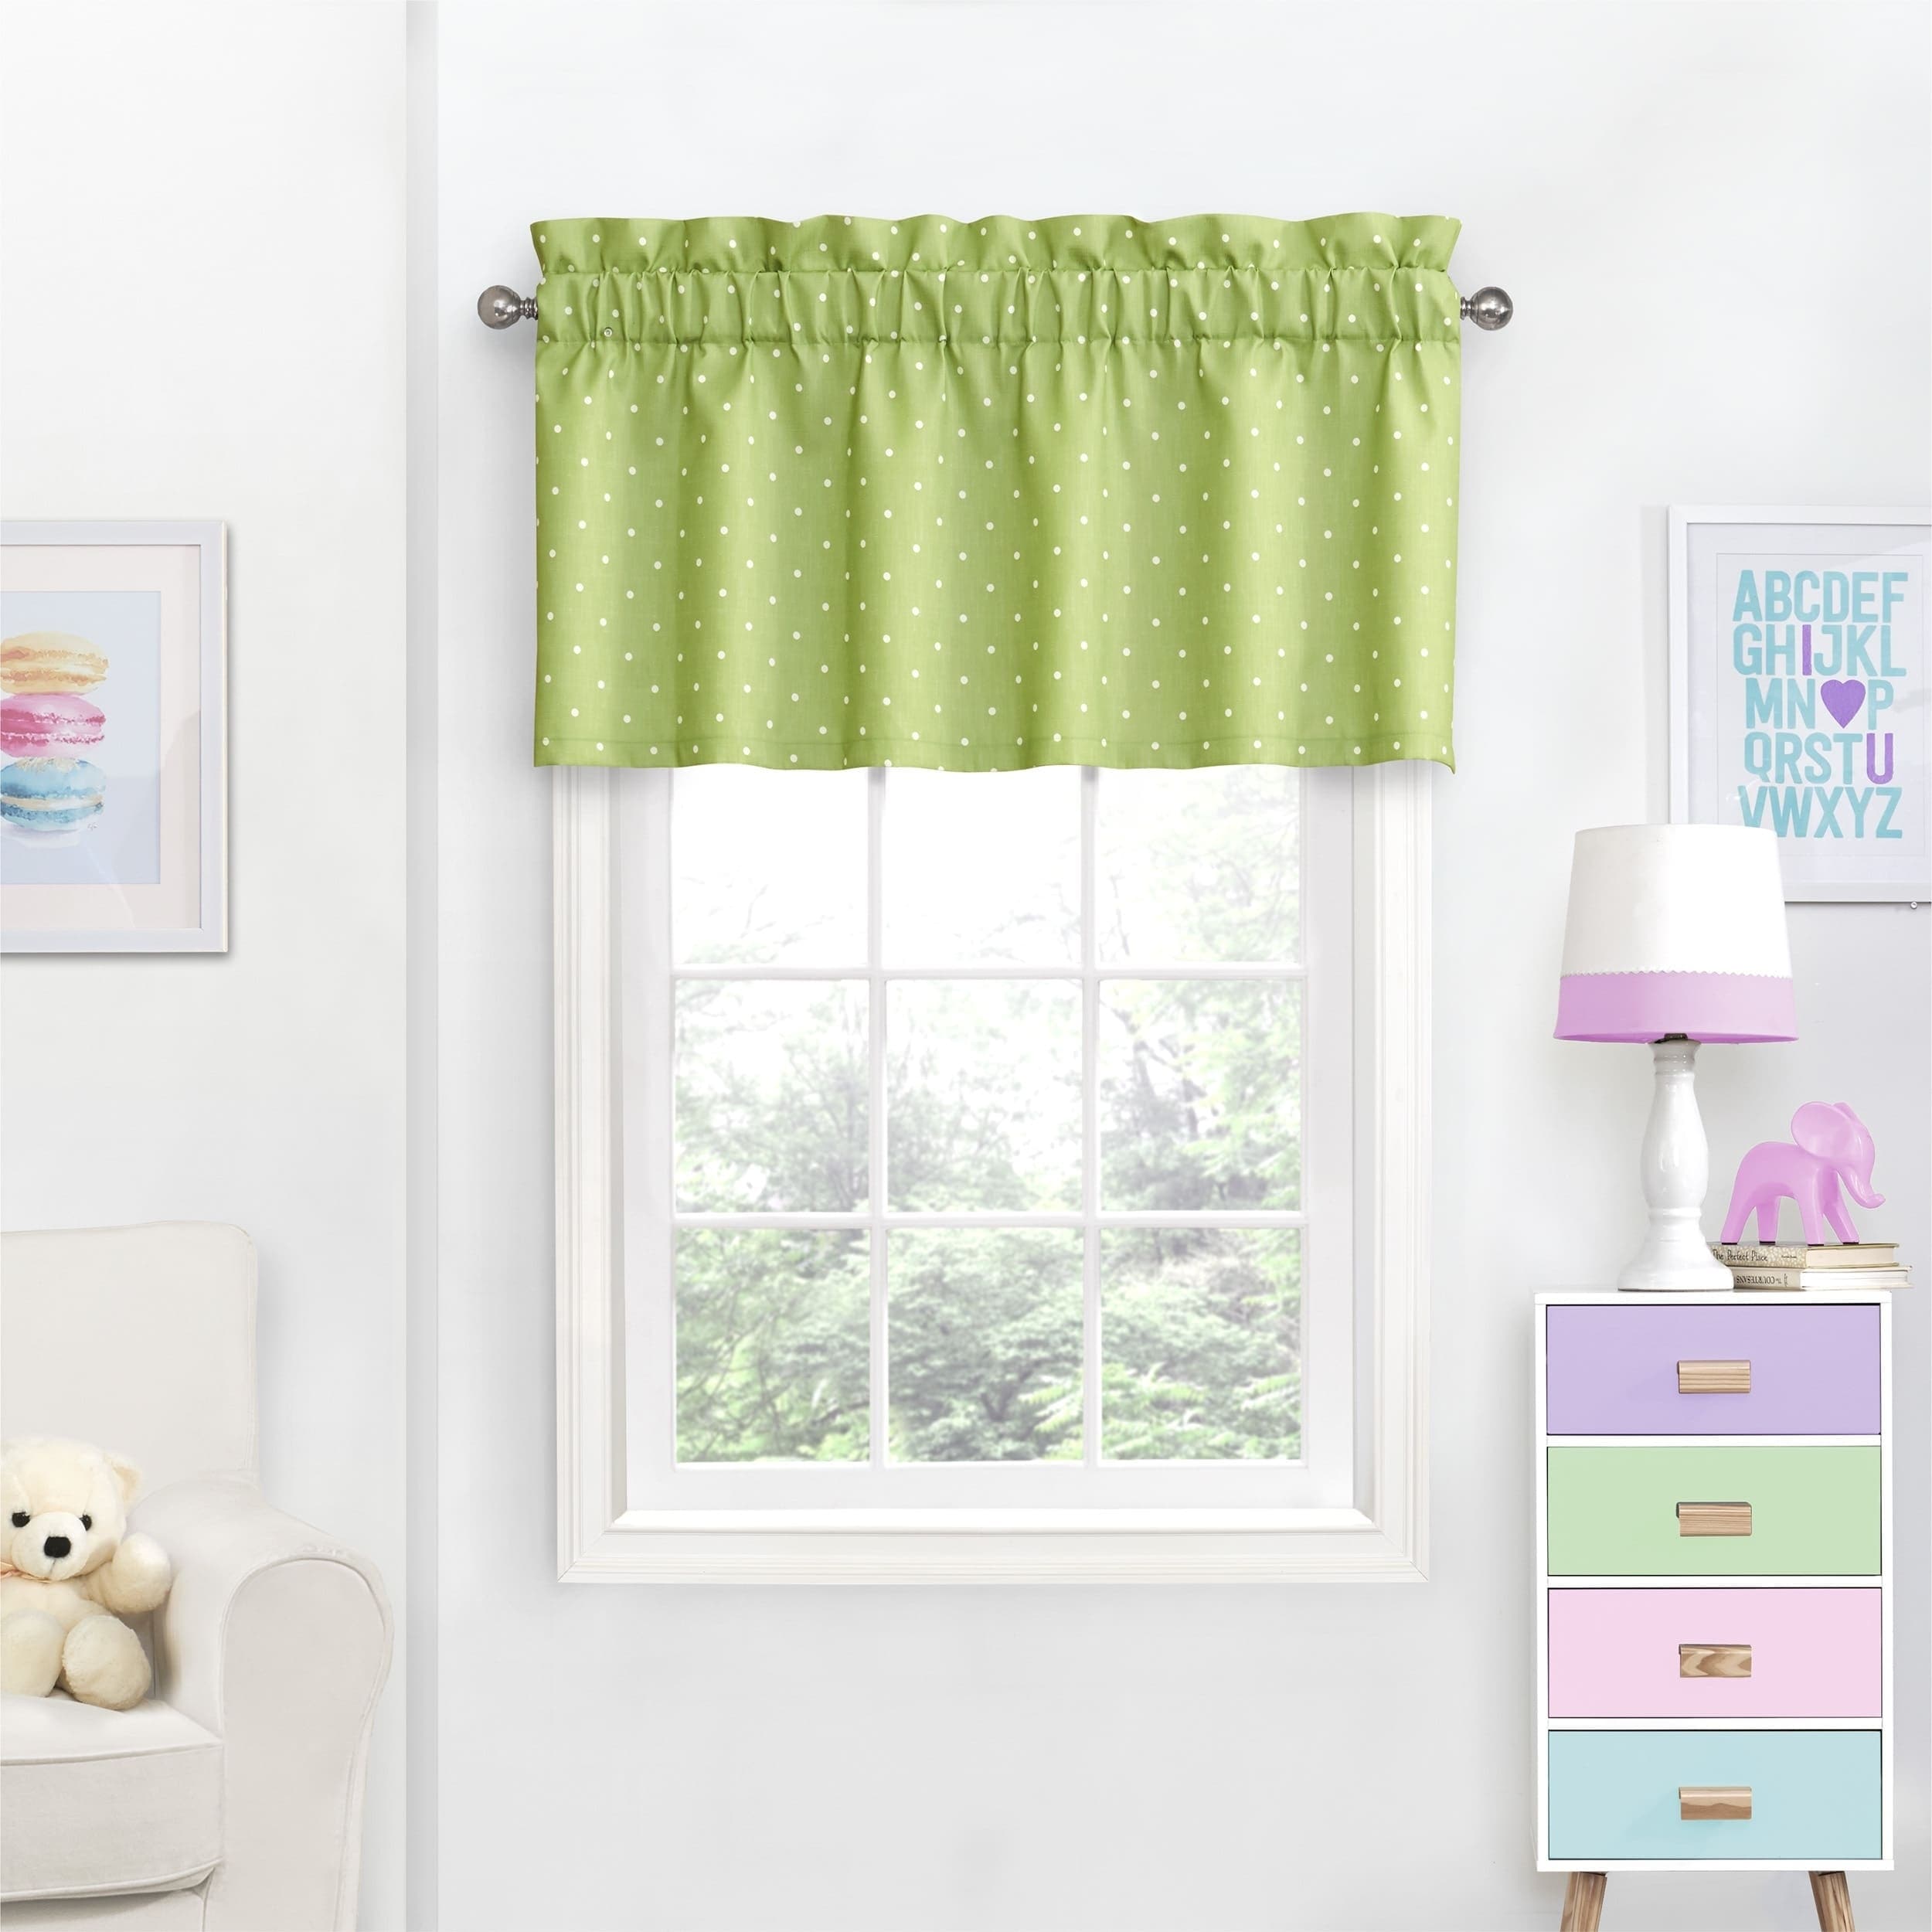 Luxury lime green window valance Pink Polka Dot Lime Green Trim Bedroom Fabric Decor Treatment Covering Curtain Window Topper Valance Home Kitchen